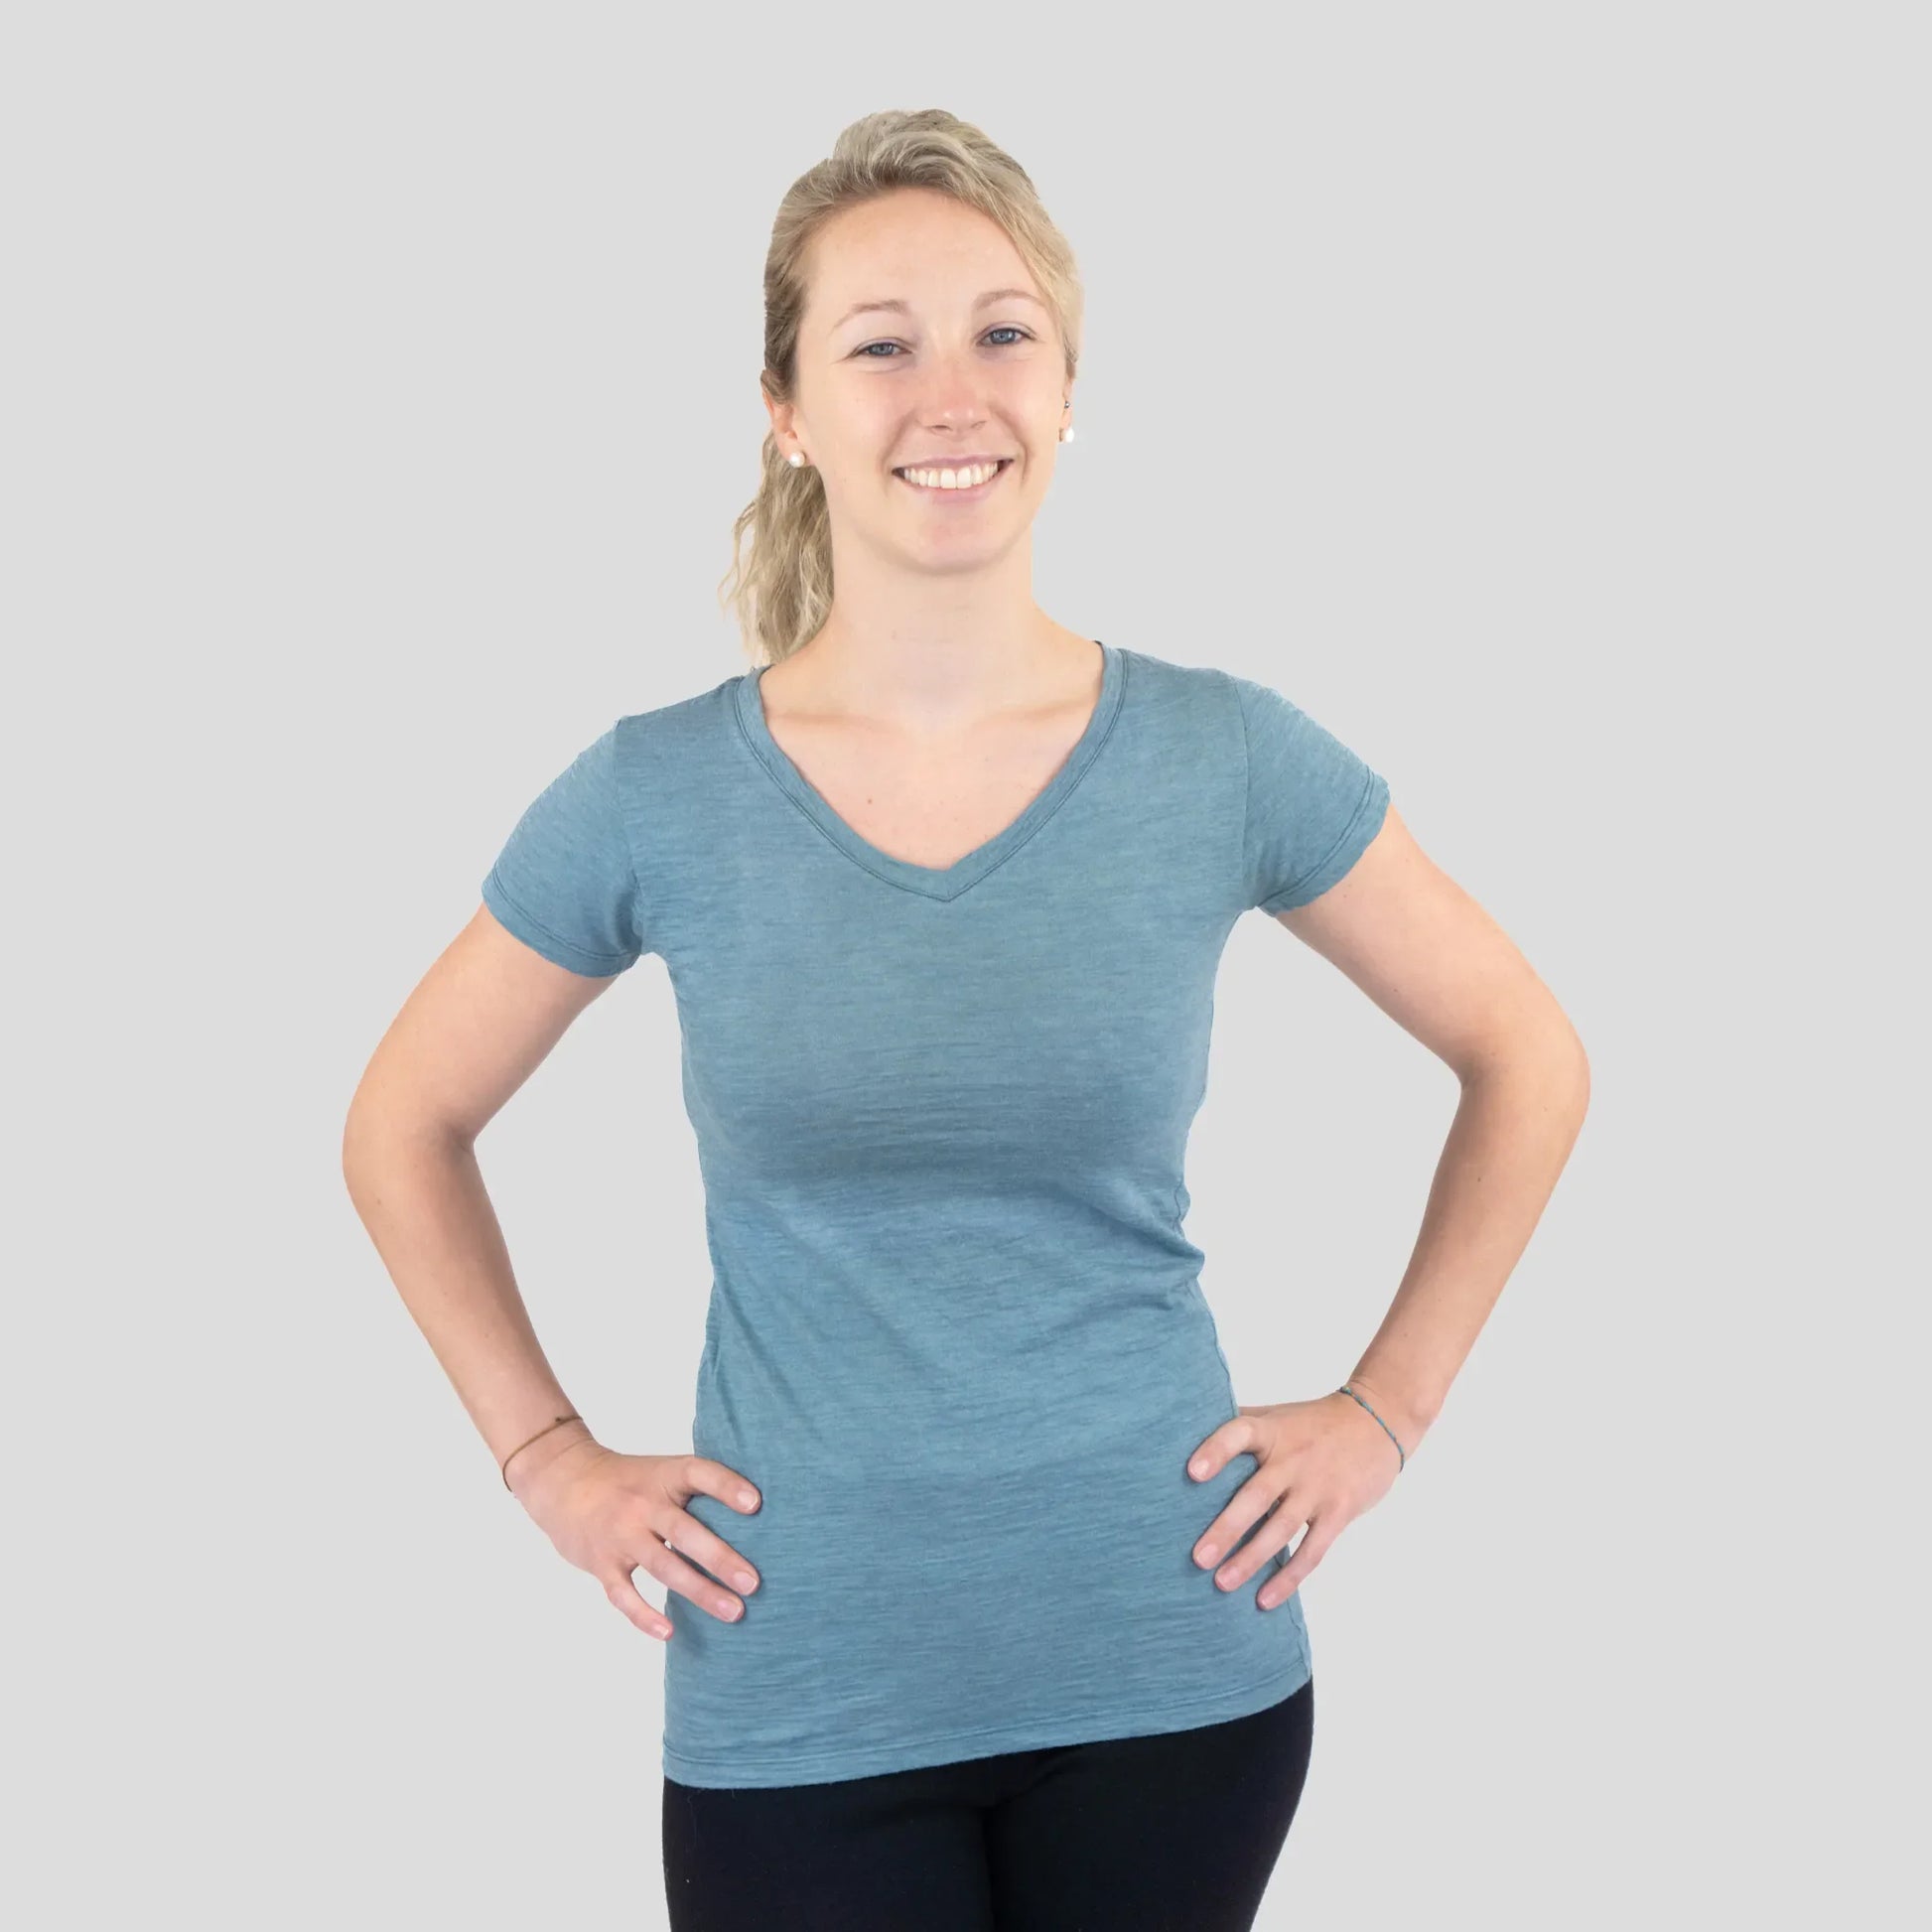 Women's Alpaca Wool Shirt: 160 Ultralight V-Neck color Natural Turquoise